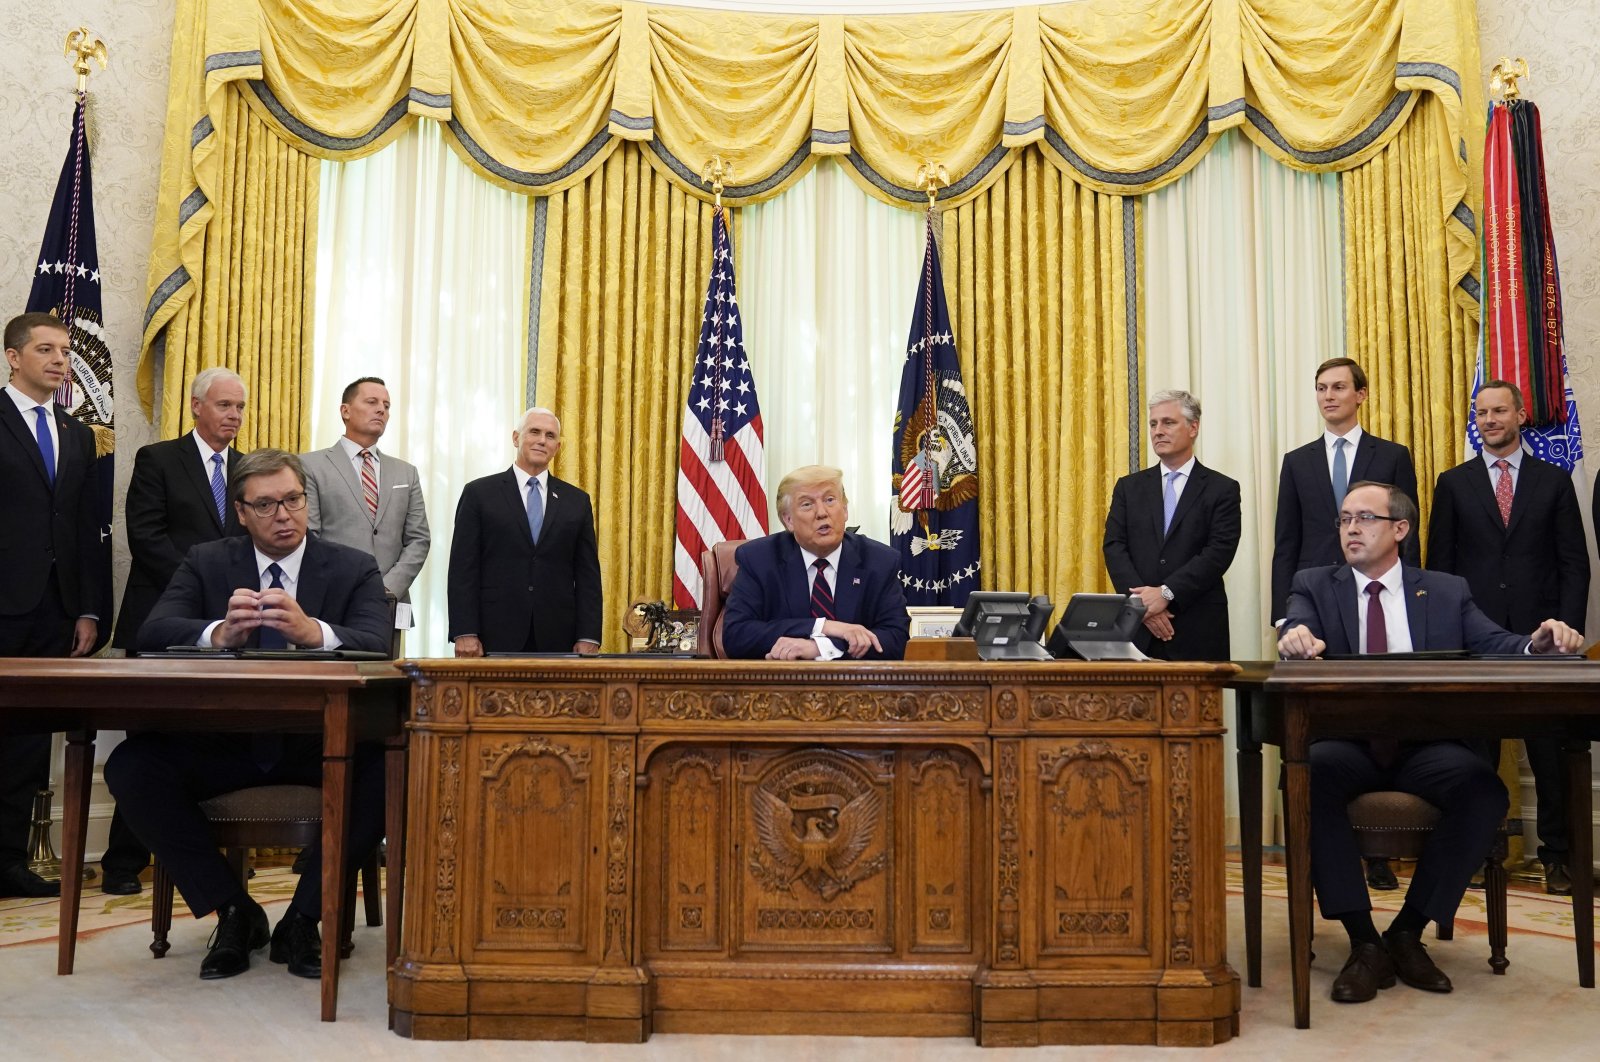 U.S. President Donald Trump (C) speaks after participating in a signing ceremony with Serbian President Aleksandar Vucic (L) and Kosovar Prime Minister Avdullah Hoti in the Oval Office of the White House, Friday, Sept. 4, 2020, in Washington. (AP Photo)